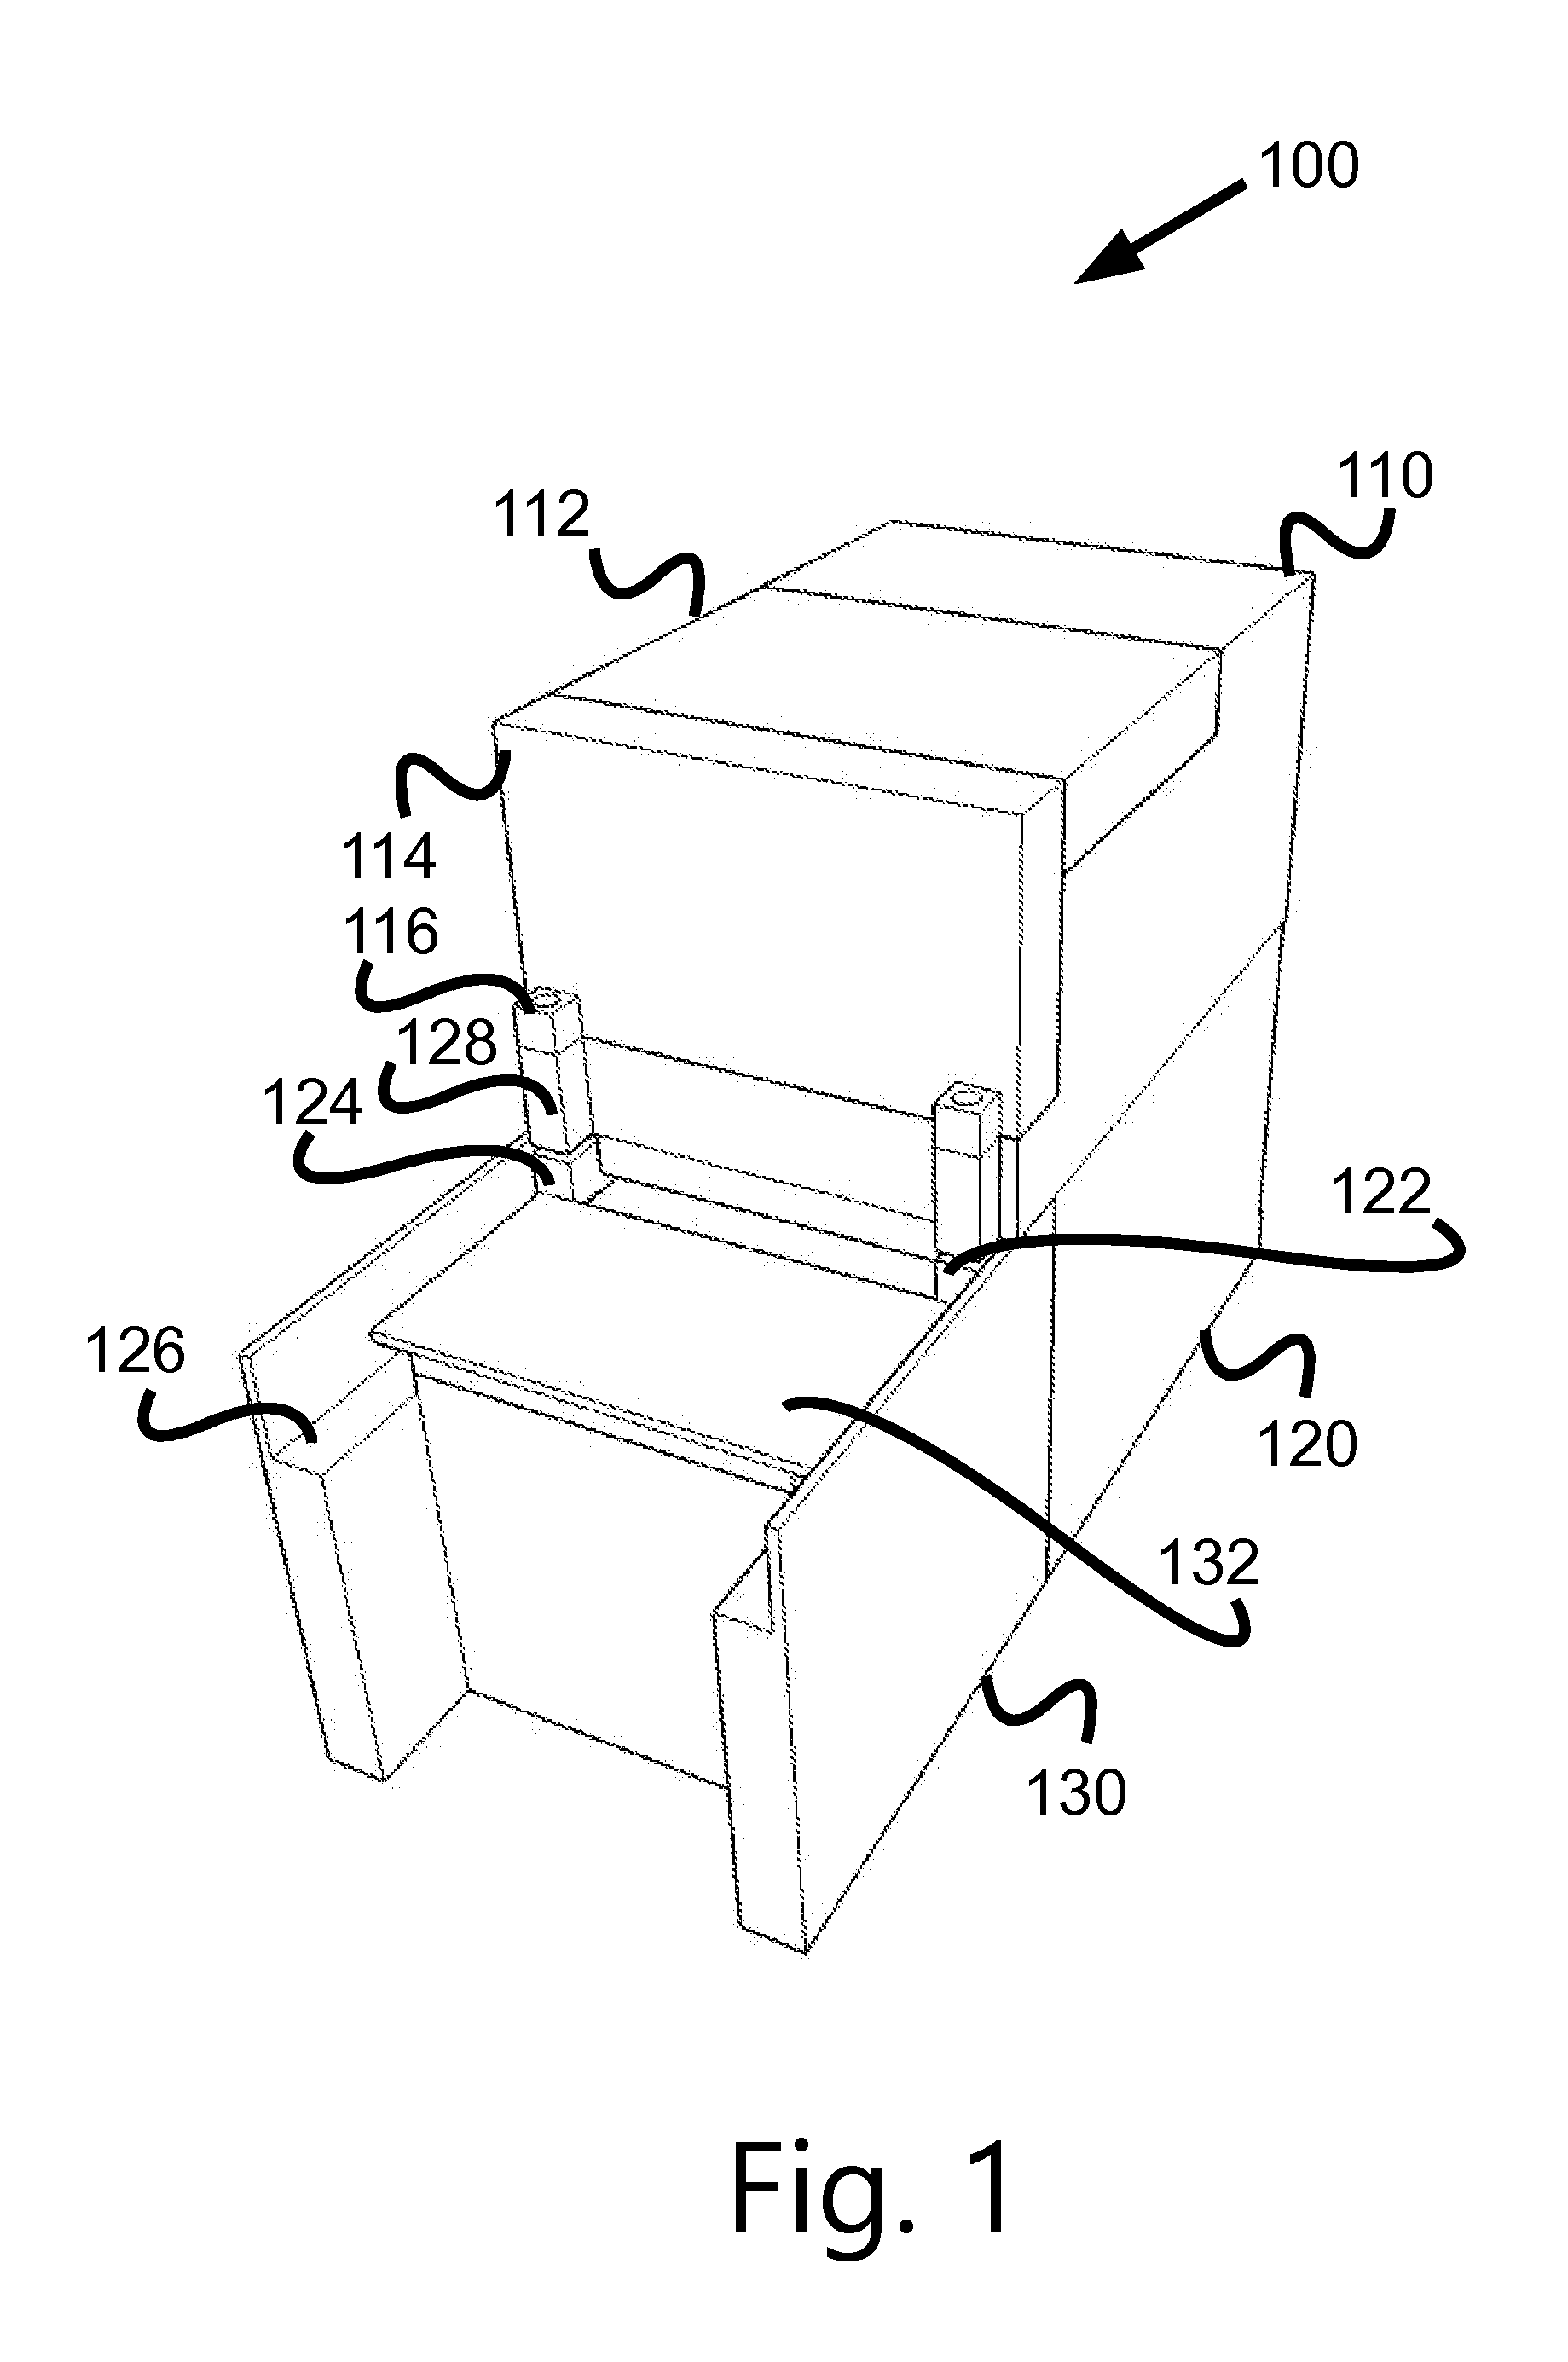 Systems and Methods for Automated Food Preparation